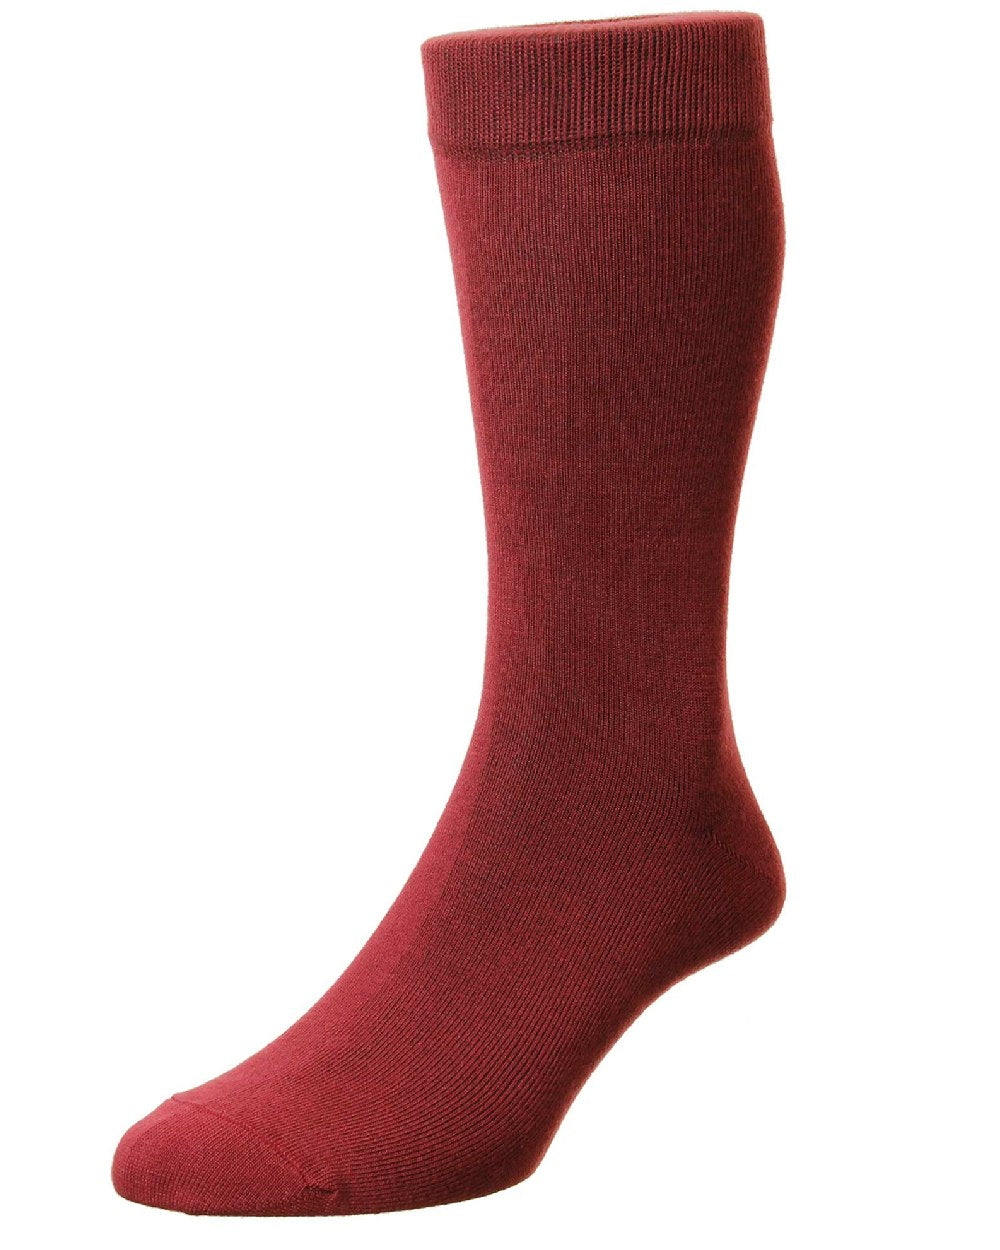 HJ Hall Allerton Supersoft Bamboo in Burgundy 